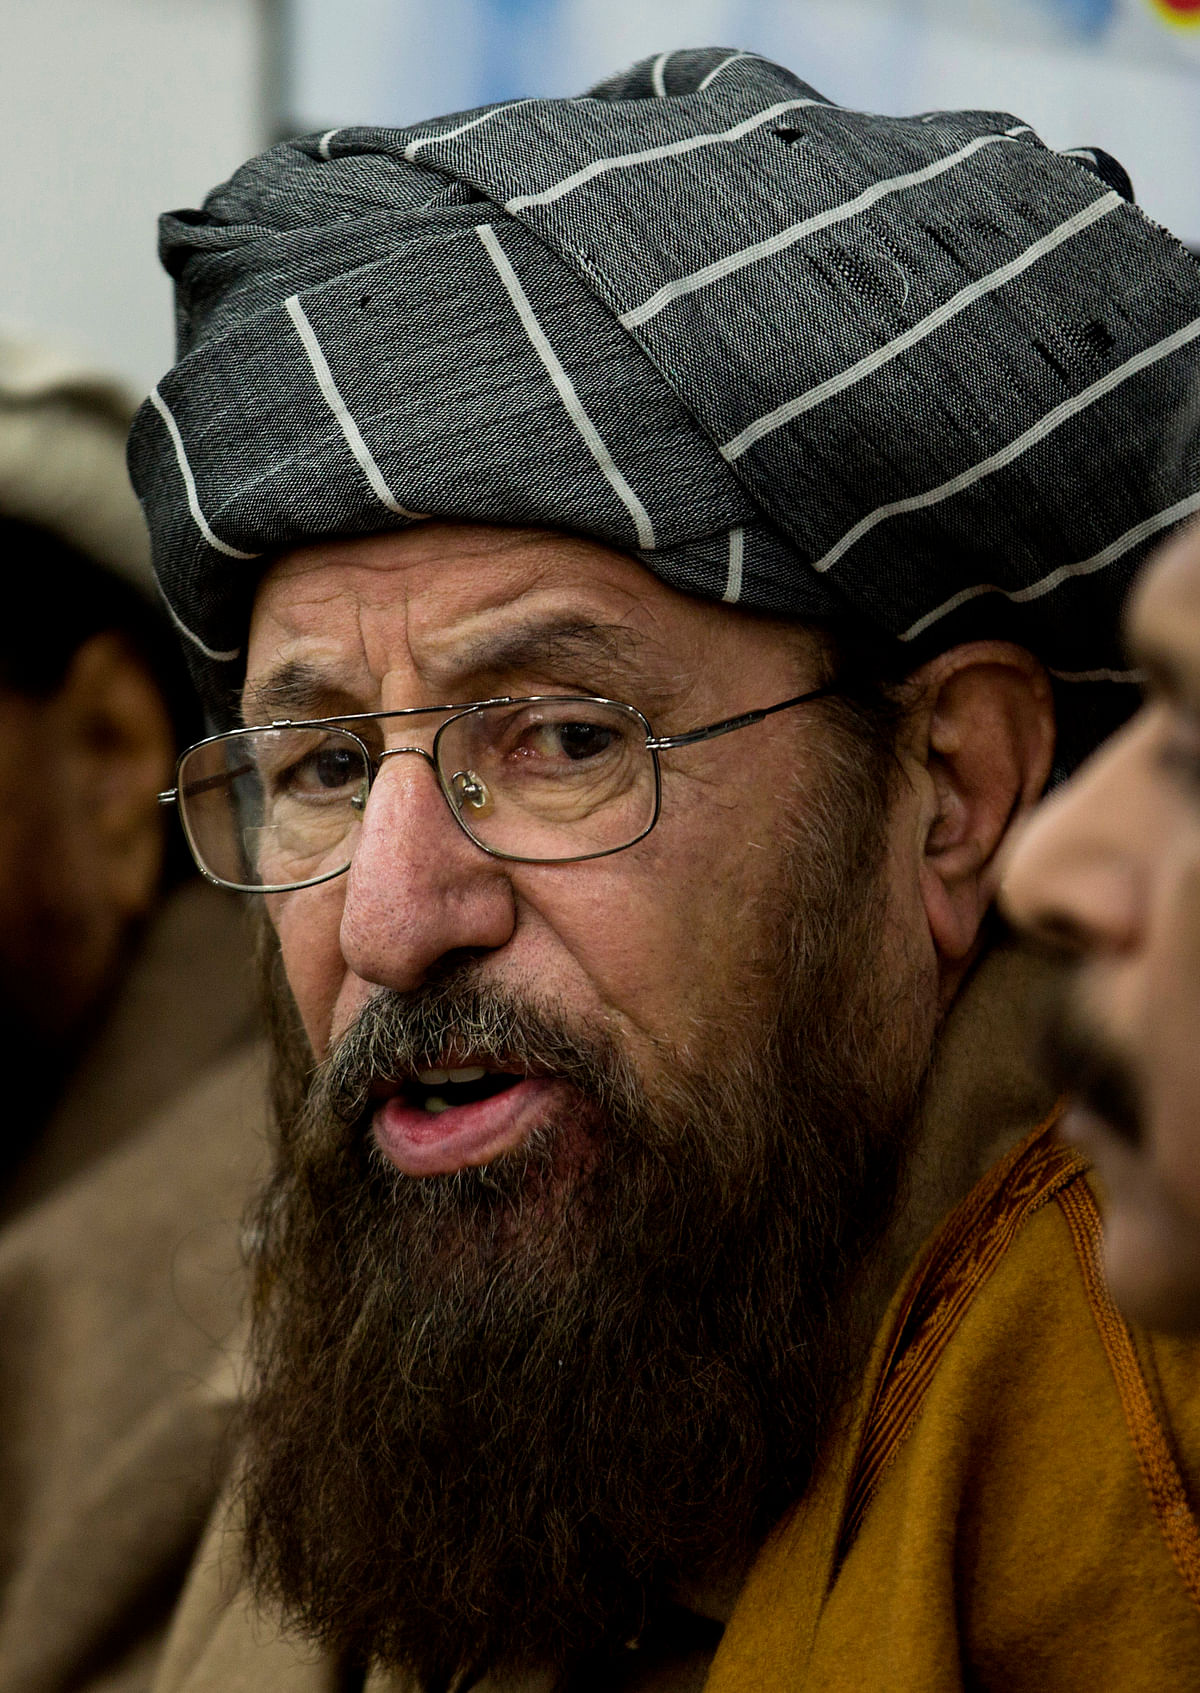 Here’s a look back at the life Maulana Samiul Haq, who’s passing has left Pakistan in a state of strife.